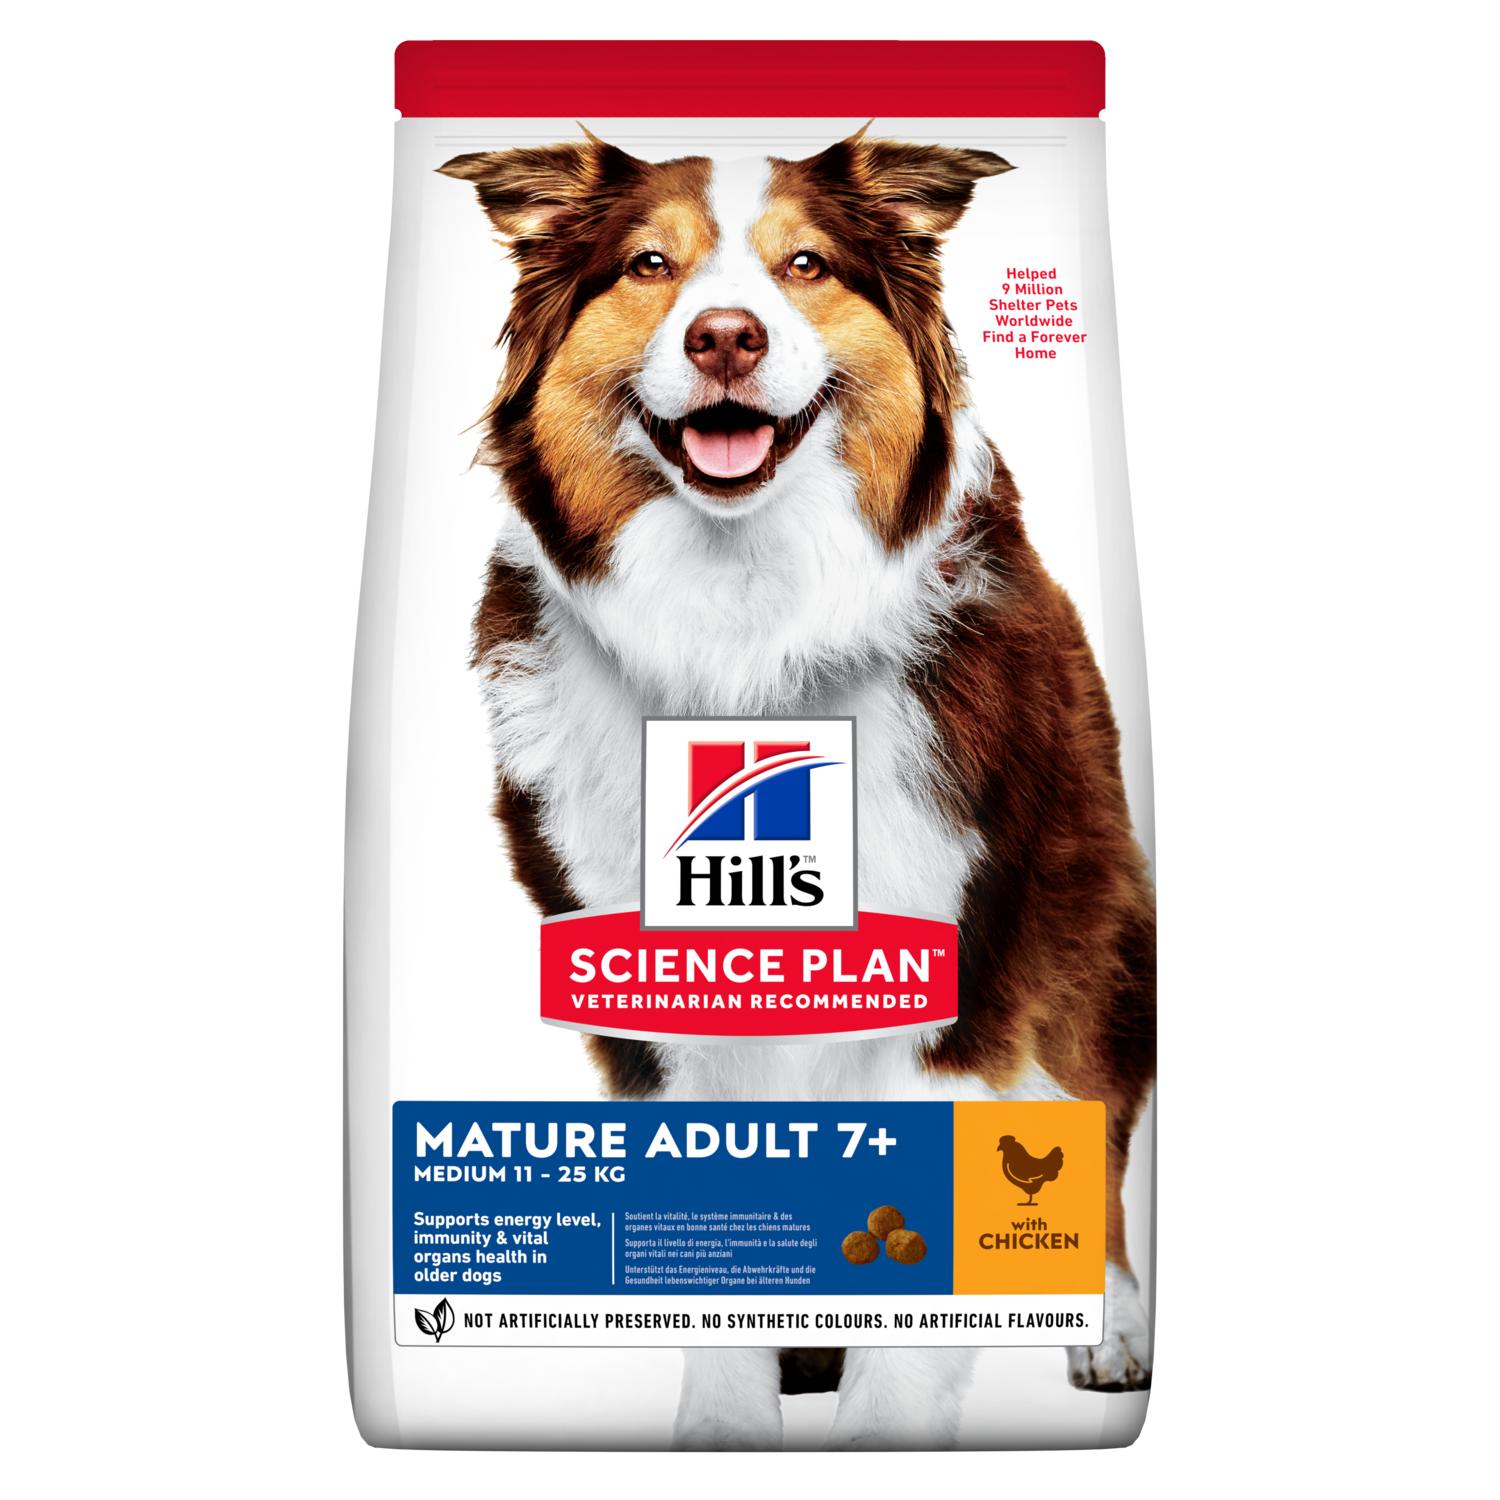 Hill's Science Plan Mature Adult Medium 7+ Dry Dog Food Chicken Flavour 2.5kg